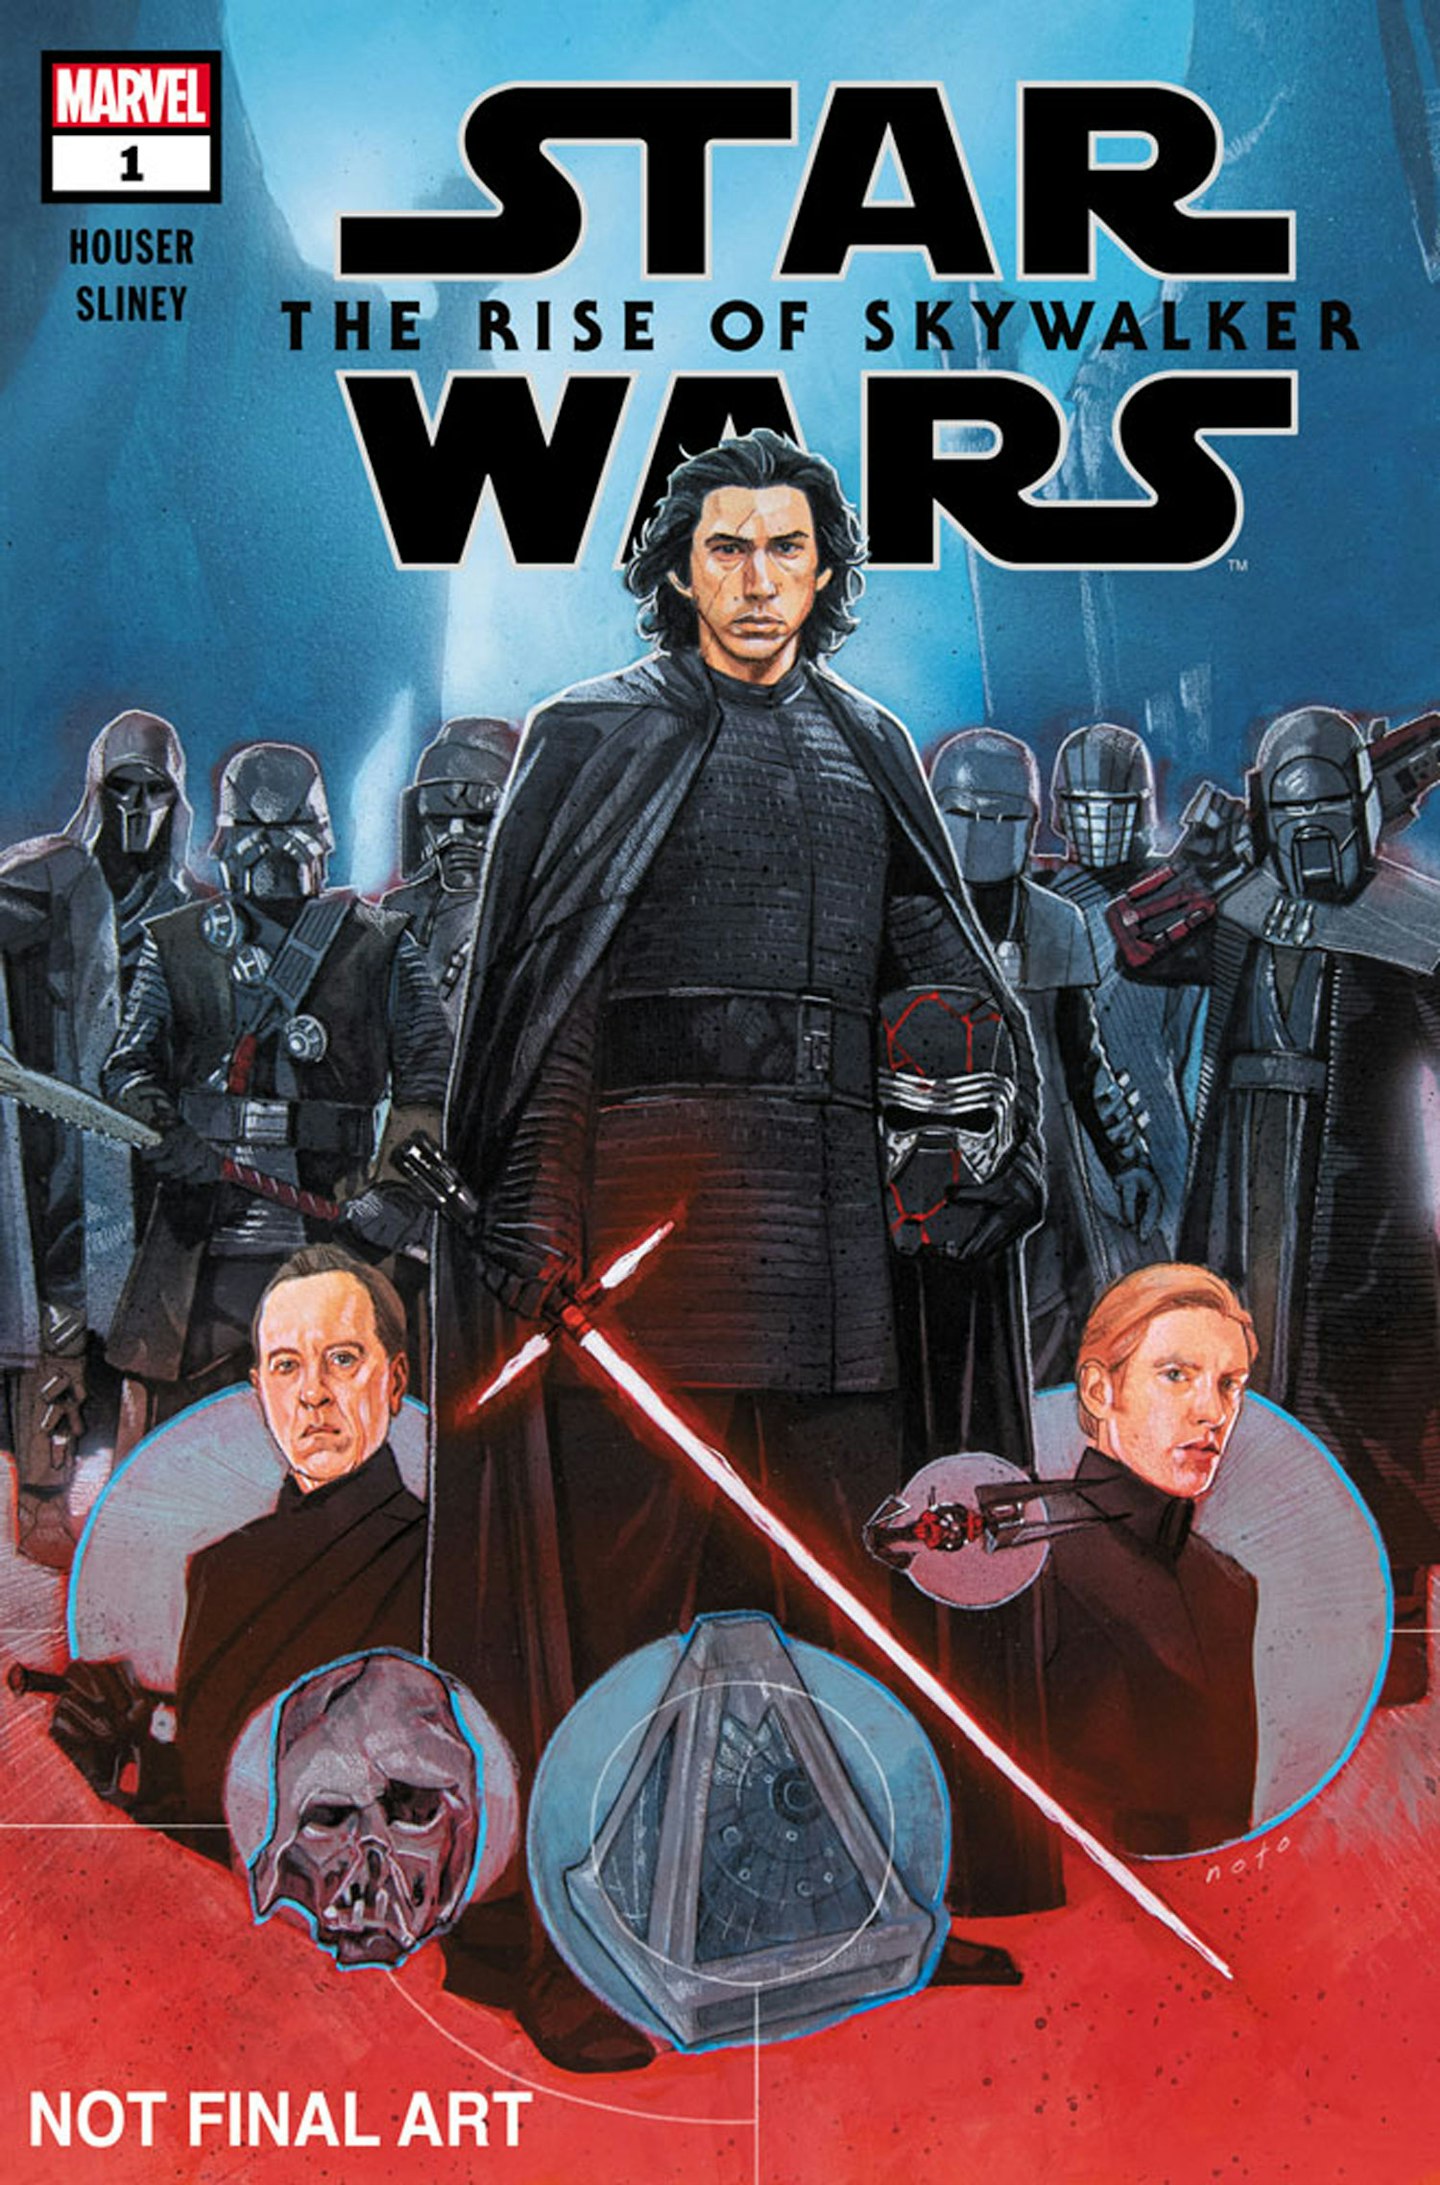 Star Wars: The Rise Of Skywalker – comic book adaptation